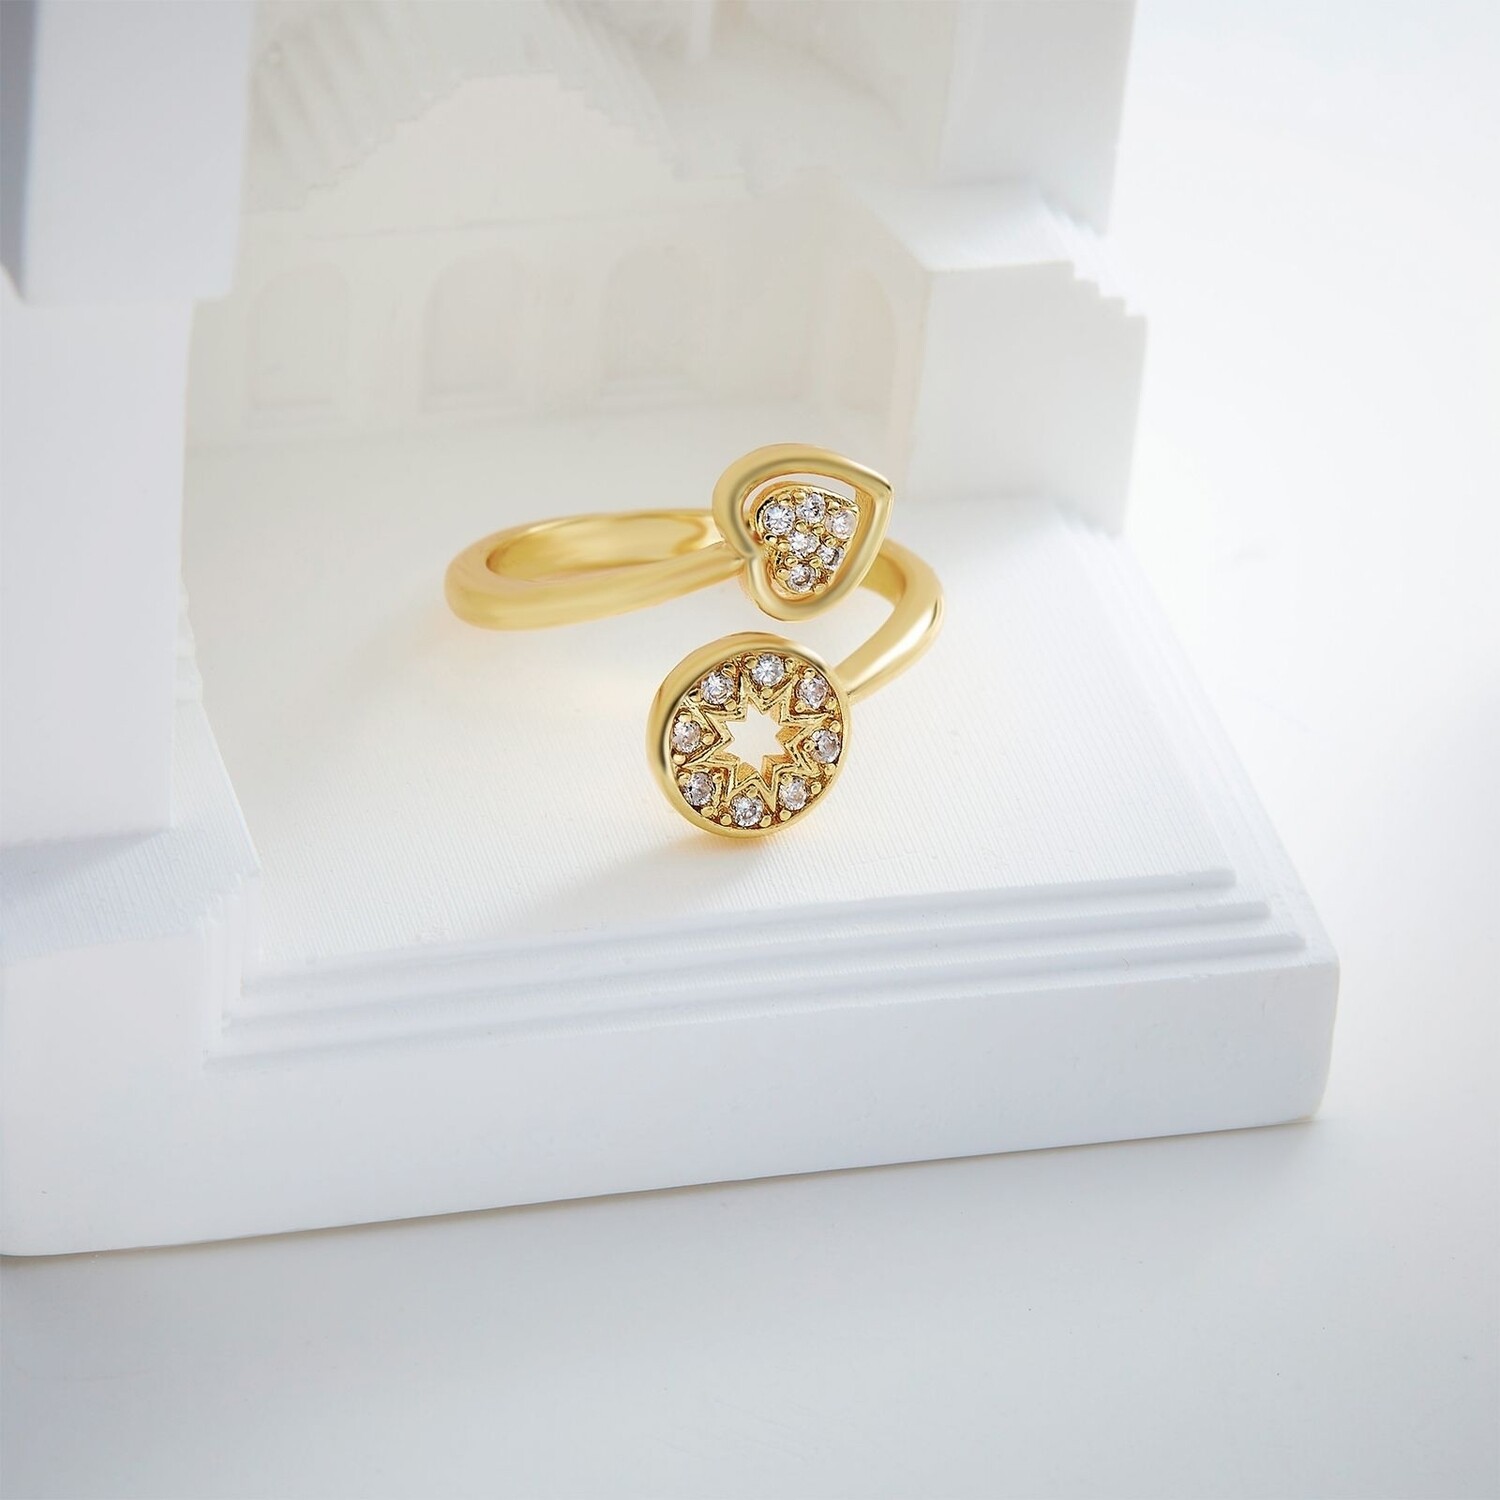 New fashion 18k gold plated valentine ring gifts